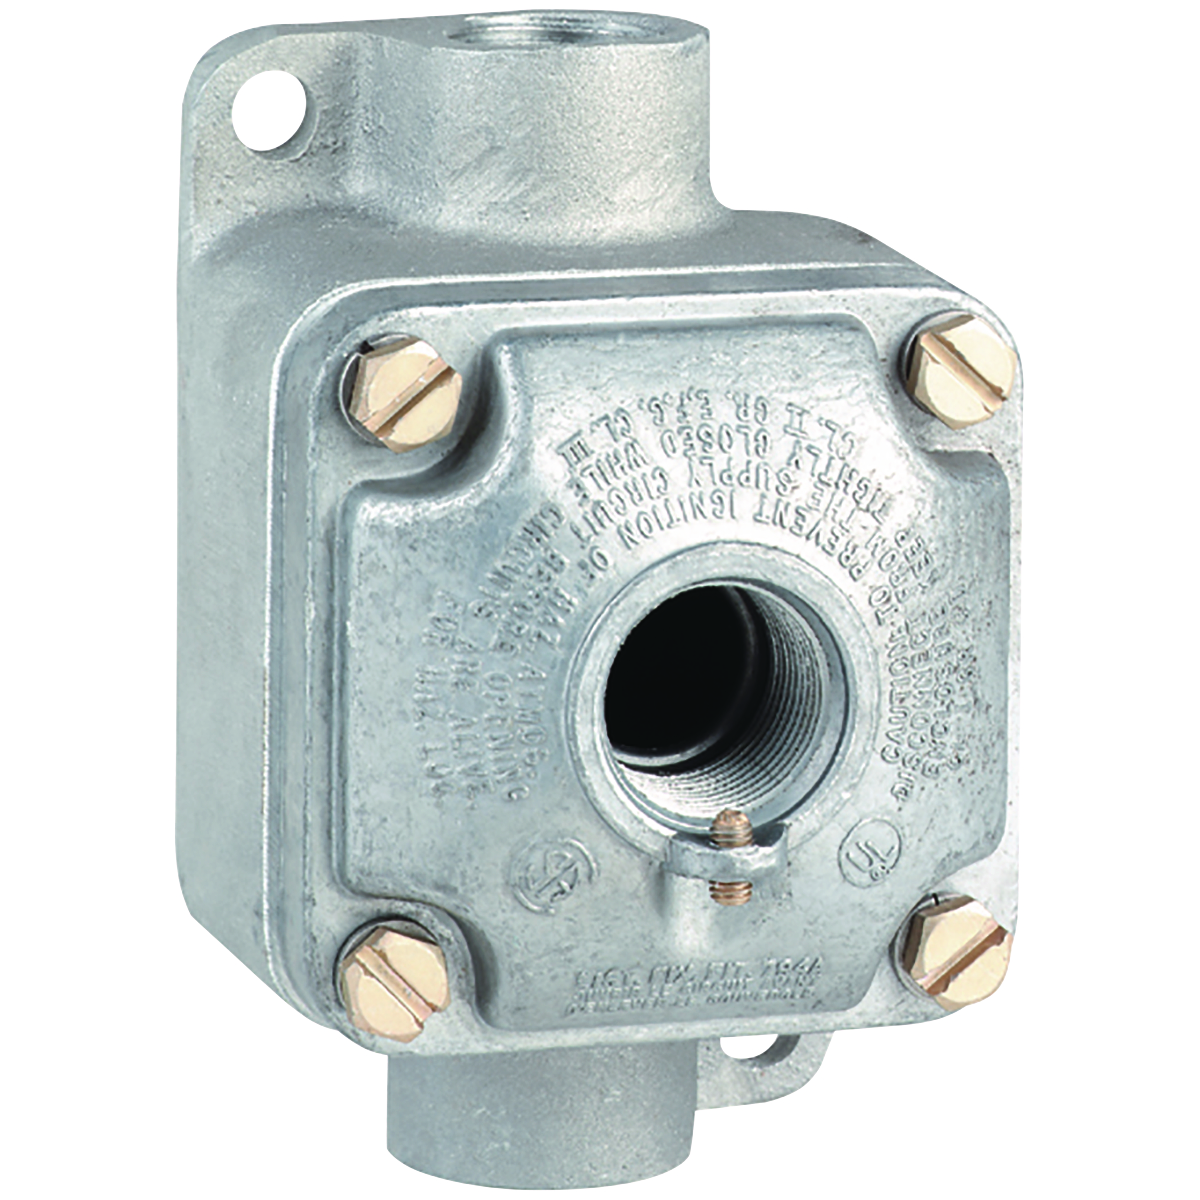 JL SERIES - ALUMINUM OUTLET BODY WITH COVER - WITH HUB COVER - BOX TYPEC - BOX HUB SIZE 1/2 INCH - COVER HUB SIZE 3/4 INCH